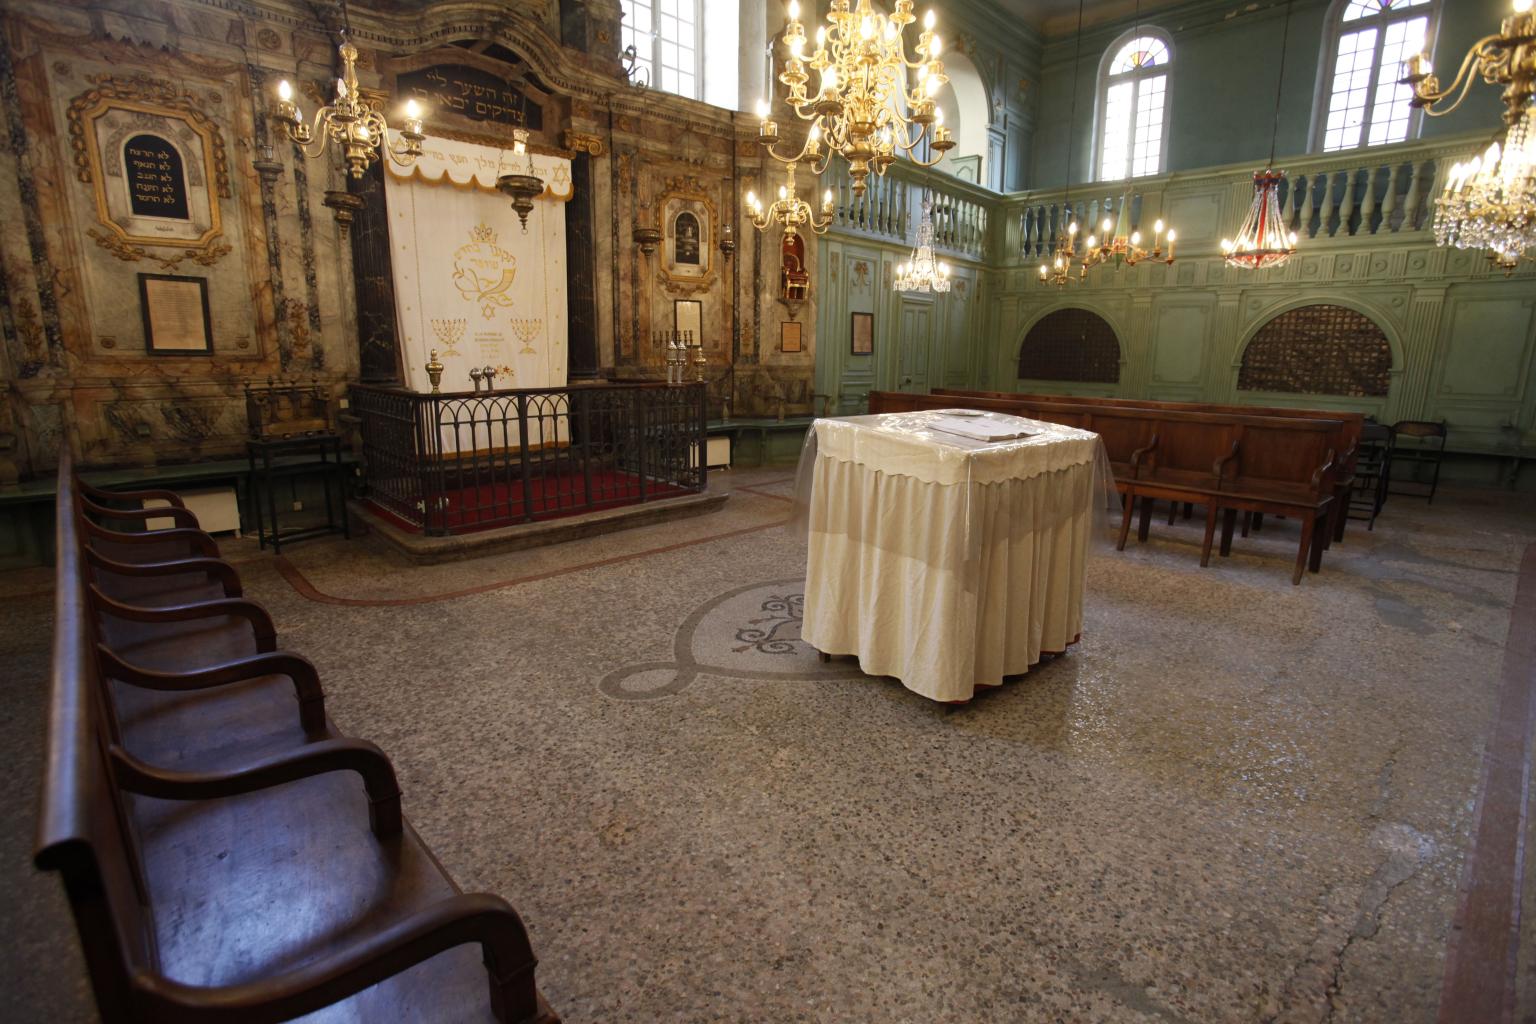 Photograph of room with benches along perimeter of wall and decorated walls, with small central table covered with cloth. 